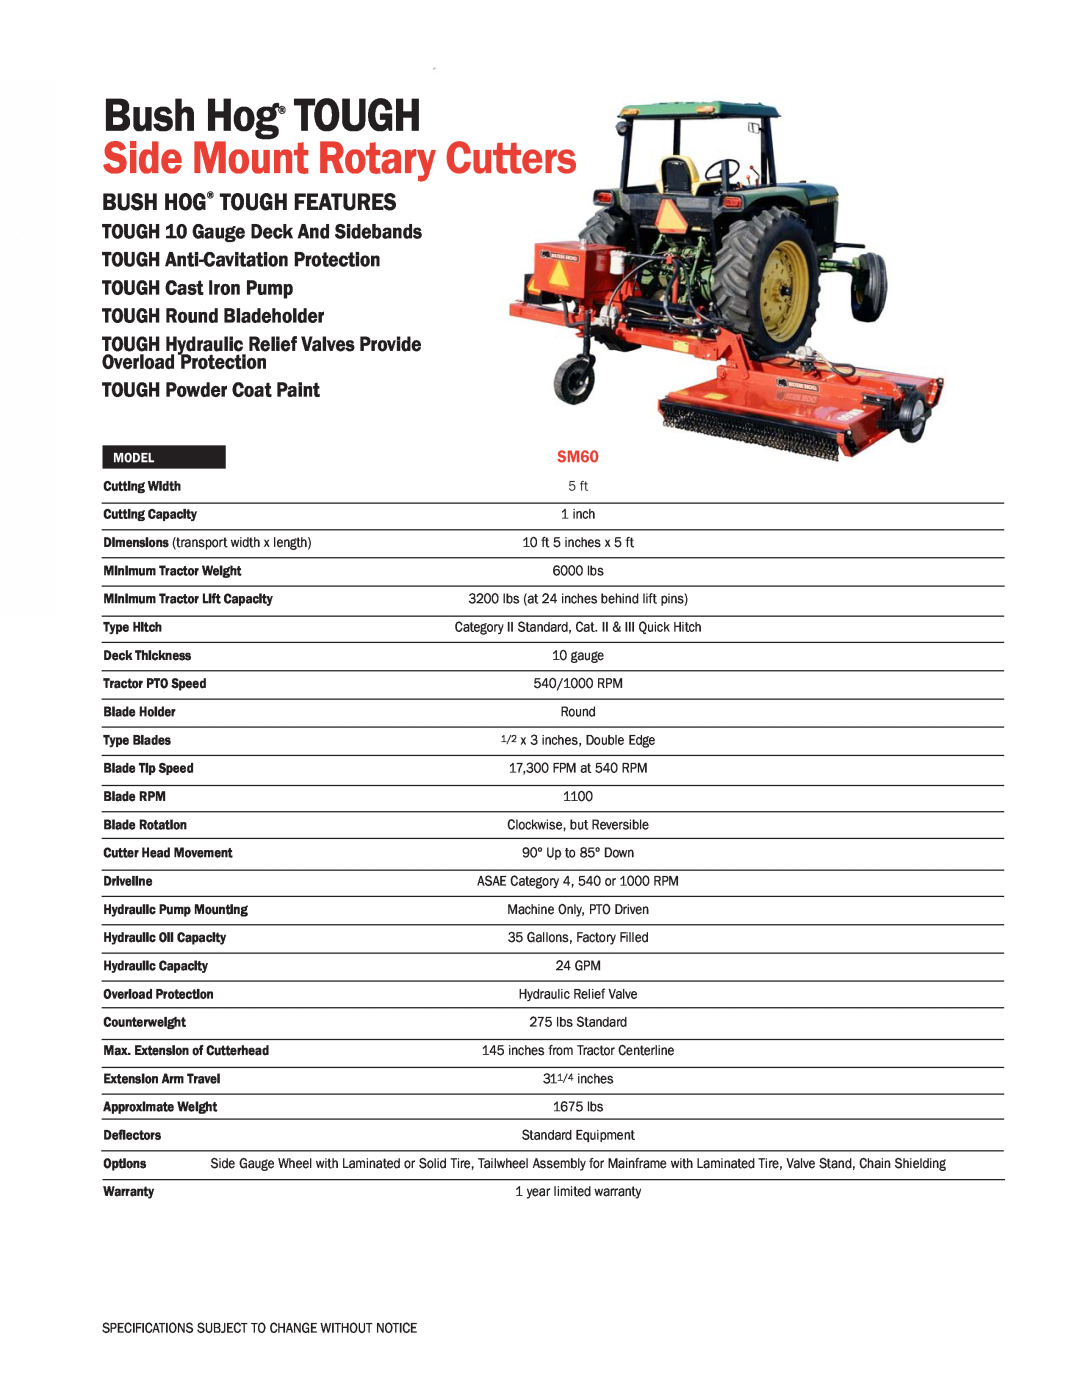 Bush Hog SM60 specifications Side Mount Rotary Cutters, Bush Hog TOUGH Features, TOUGH 10 Gauge Deck And Sidebands 